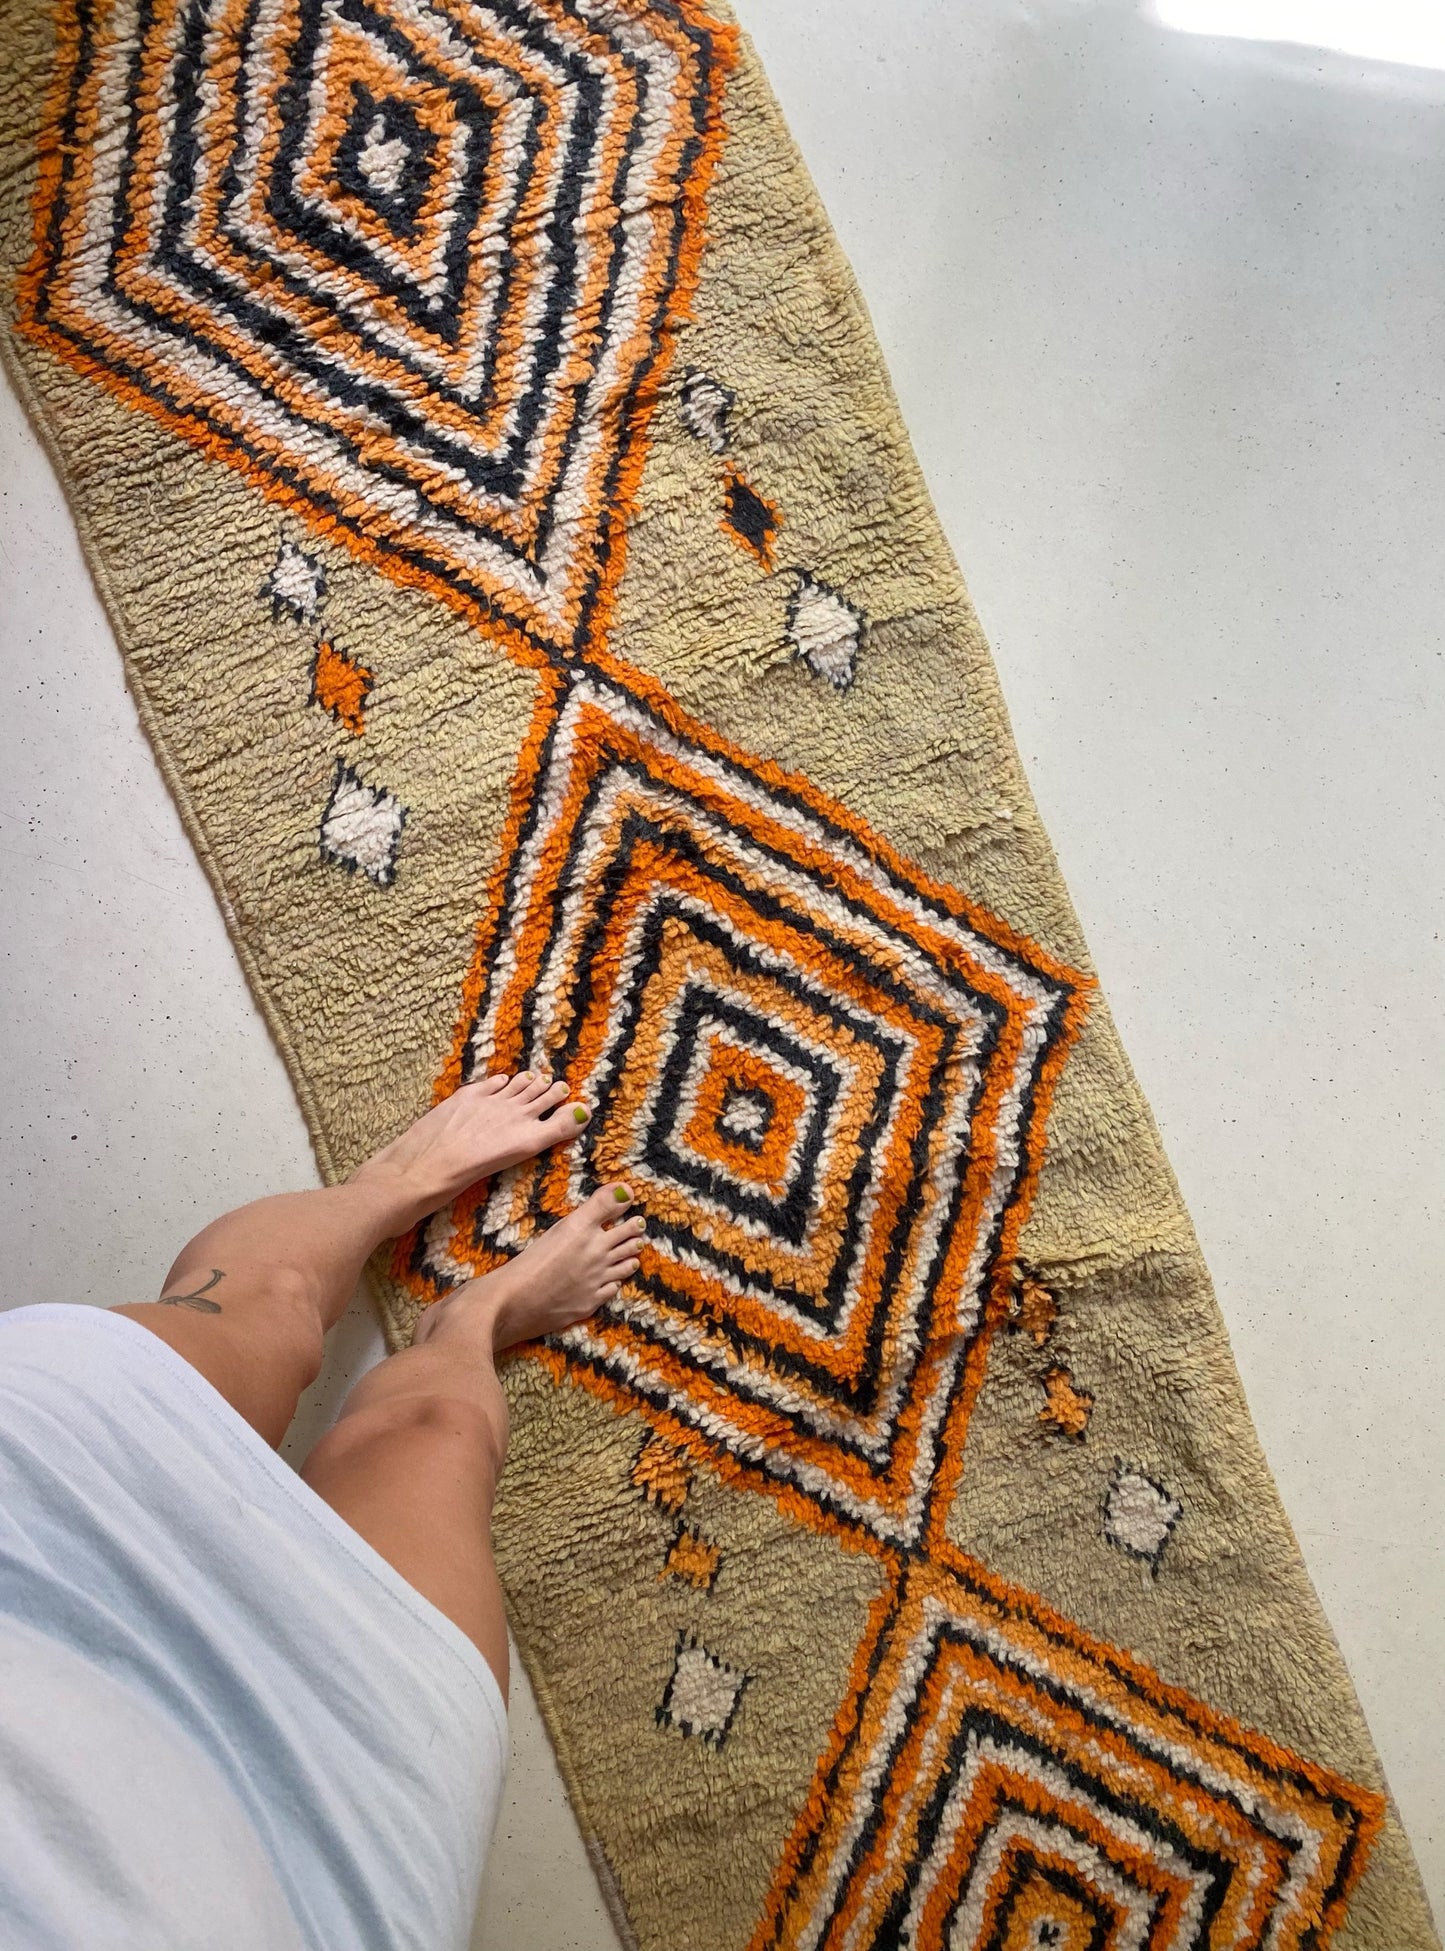 Moroccan runner hand woven with striped orange, white and black diamonds.